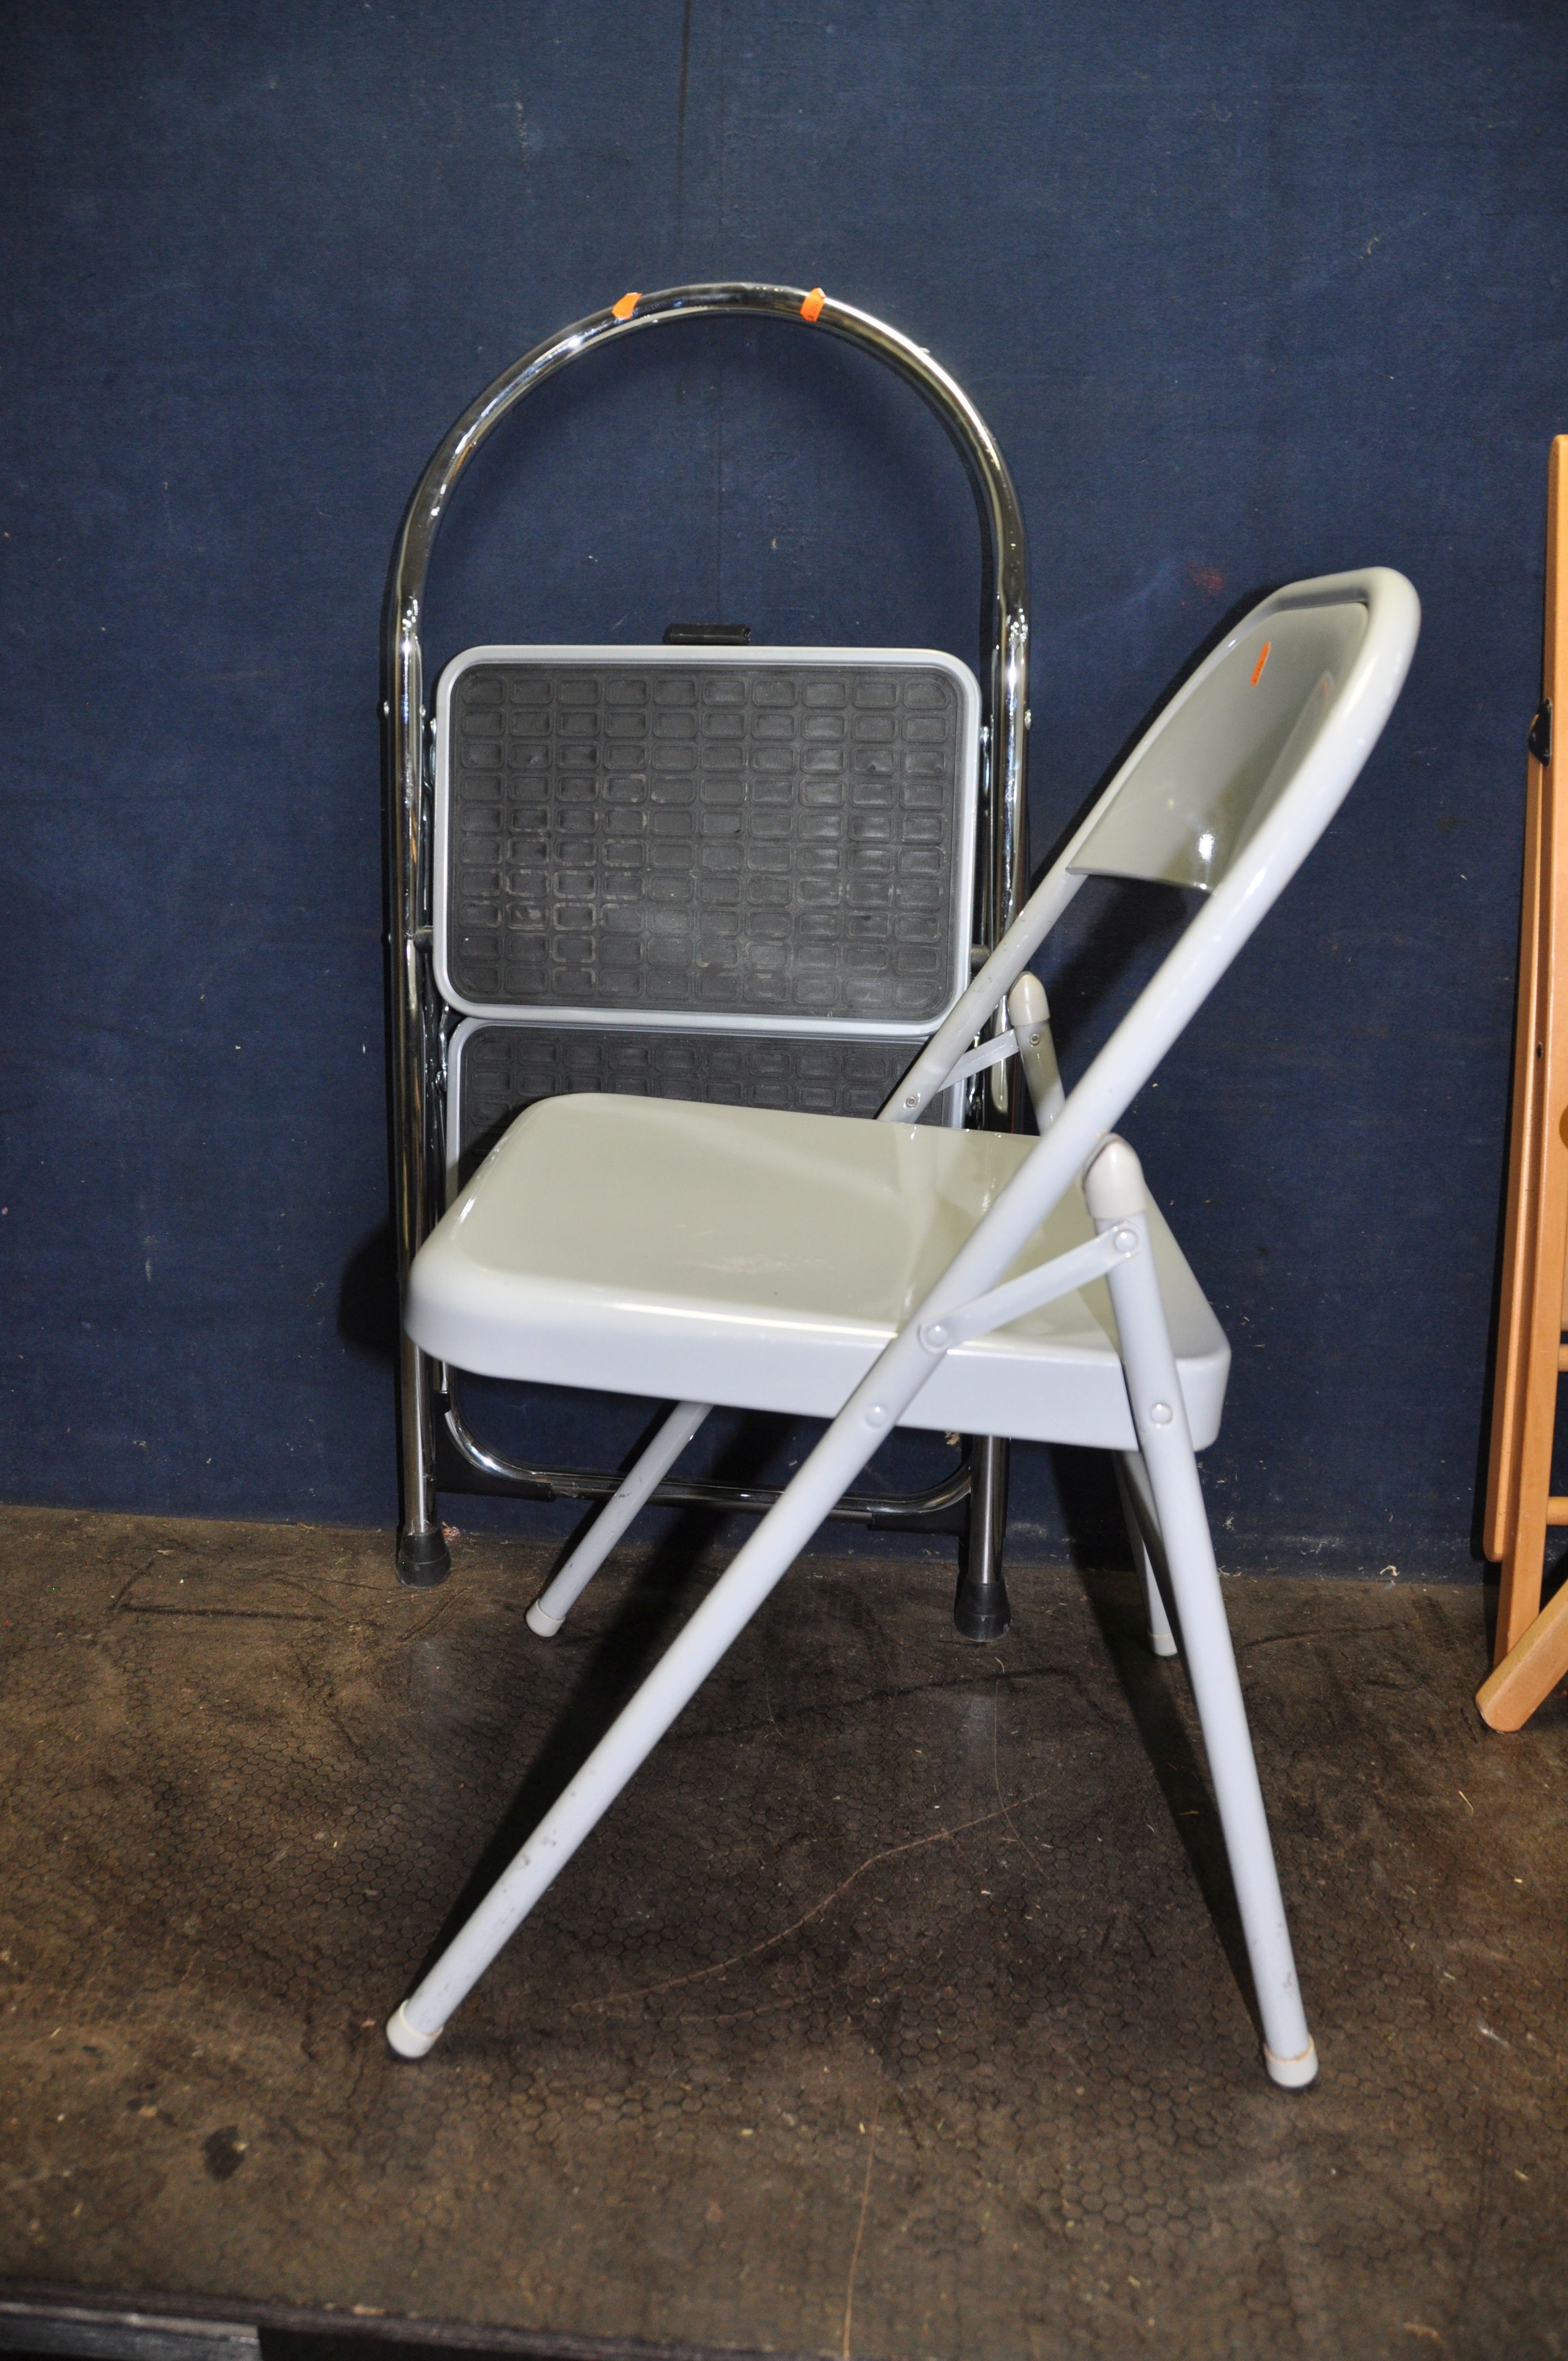 A PAIR OF IKEA TERJE FOLDING CHAIRS, a folding metal chair and a small set of steps (4) - Image 2 of 2